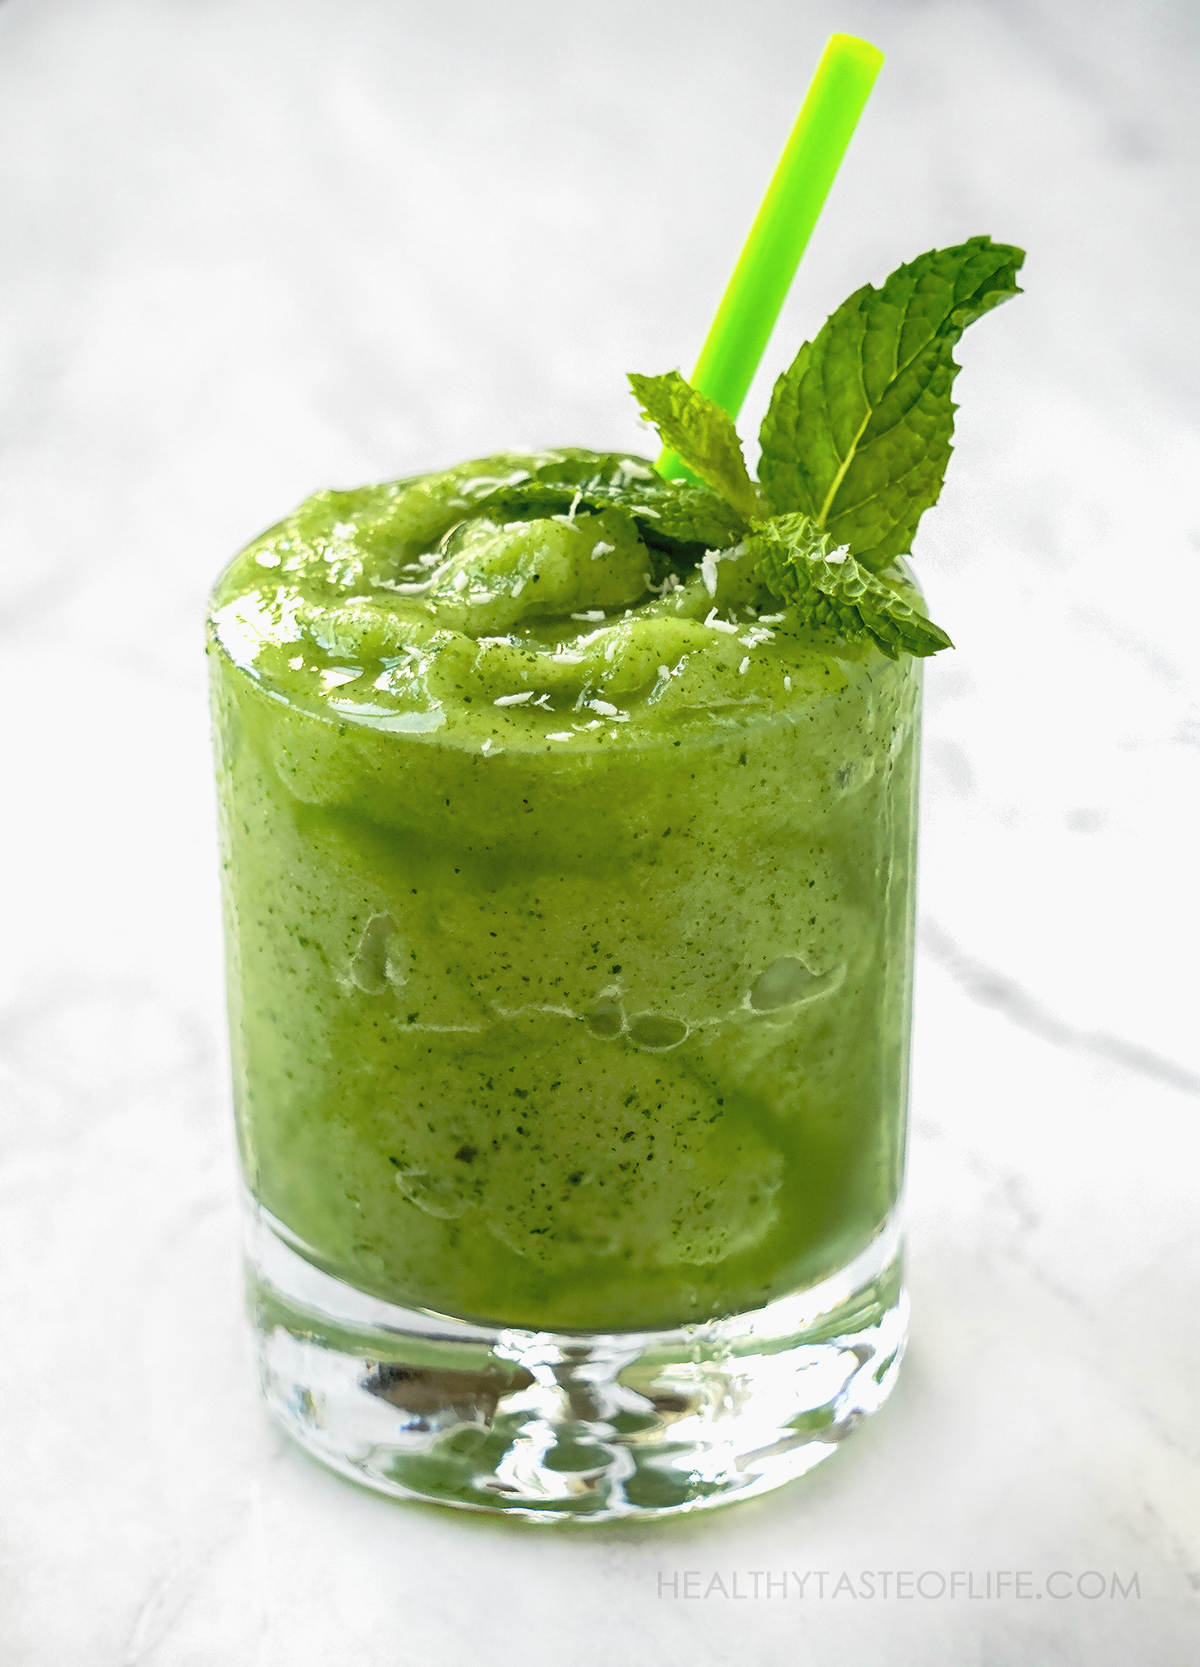 Homemade honeydew drink recipe thick and cold as a smoothie with a slush consistency.